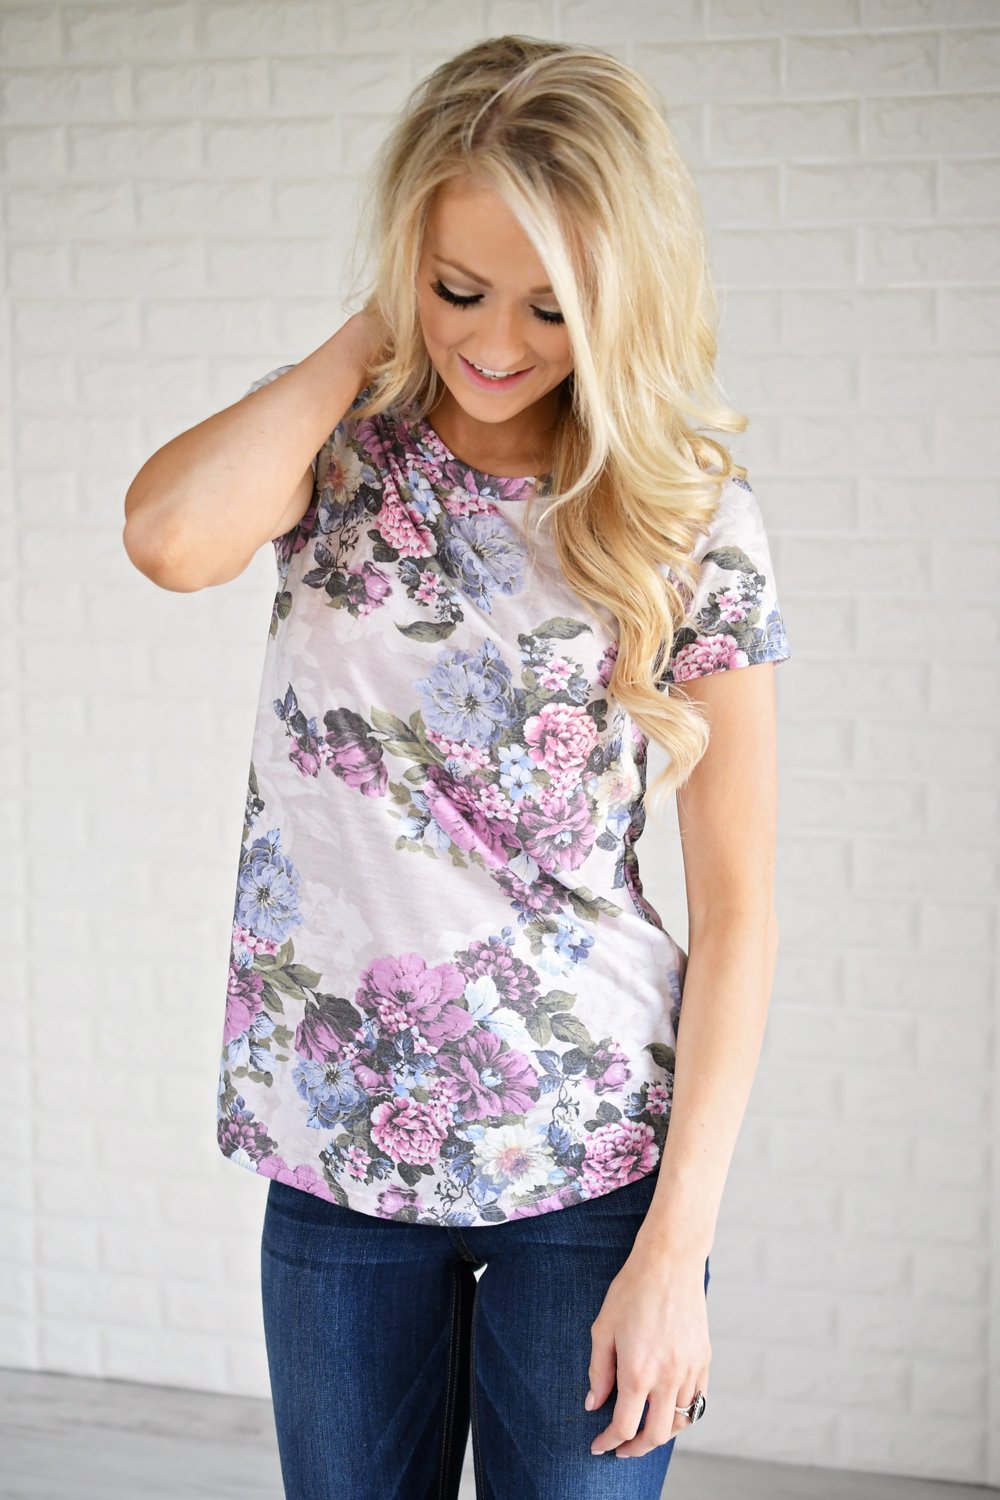 Stuck in the Moment Violet Floral Top – The Pulse Boutique